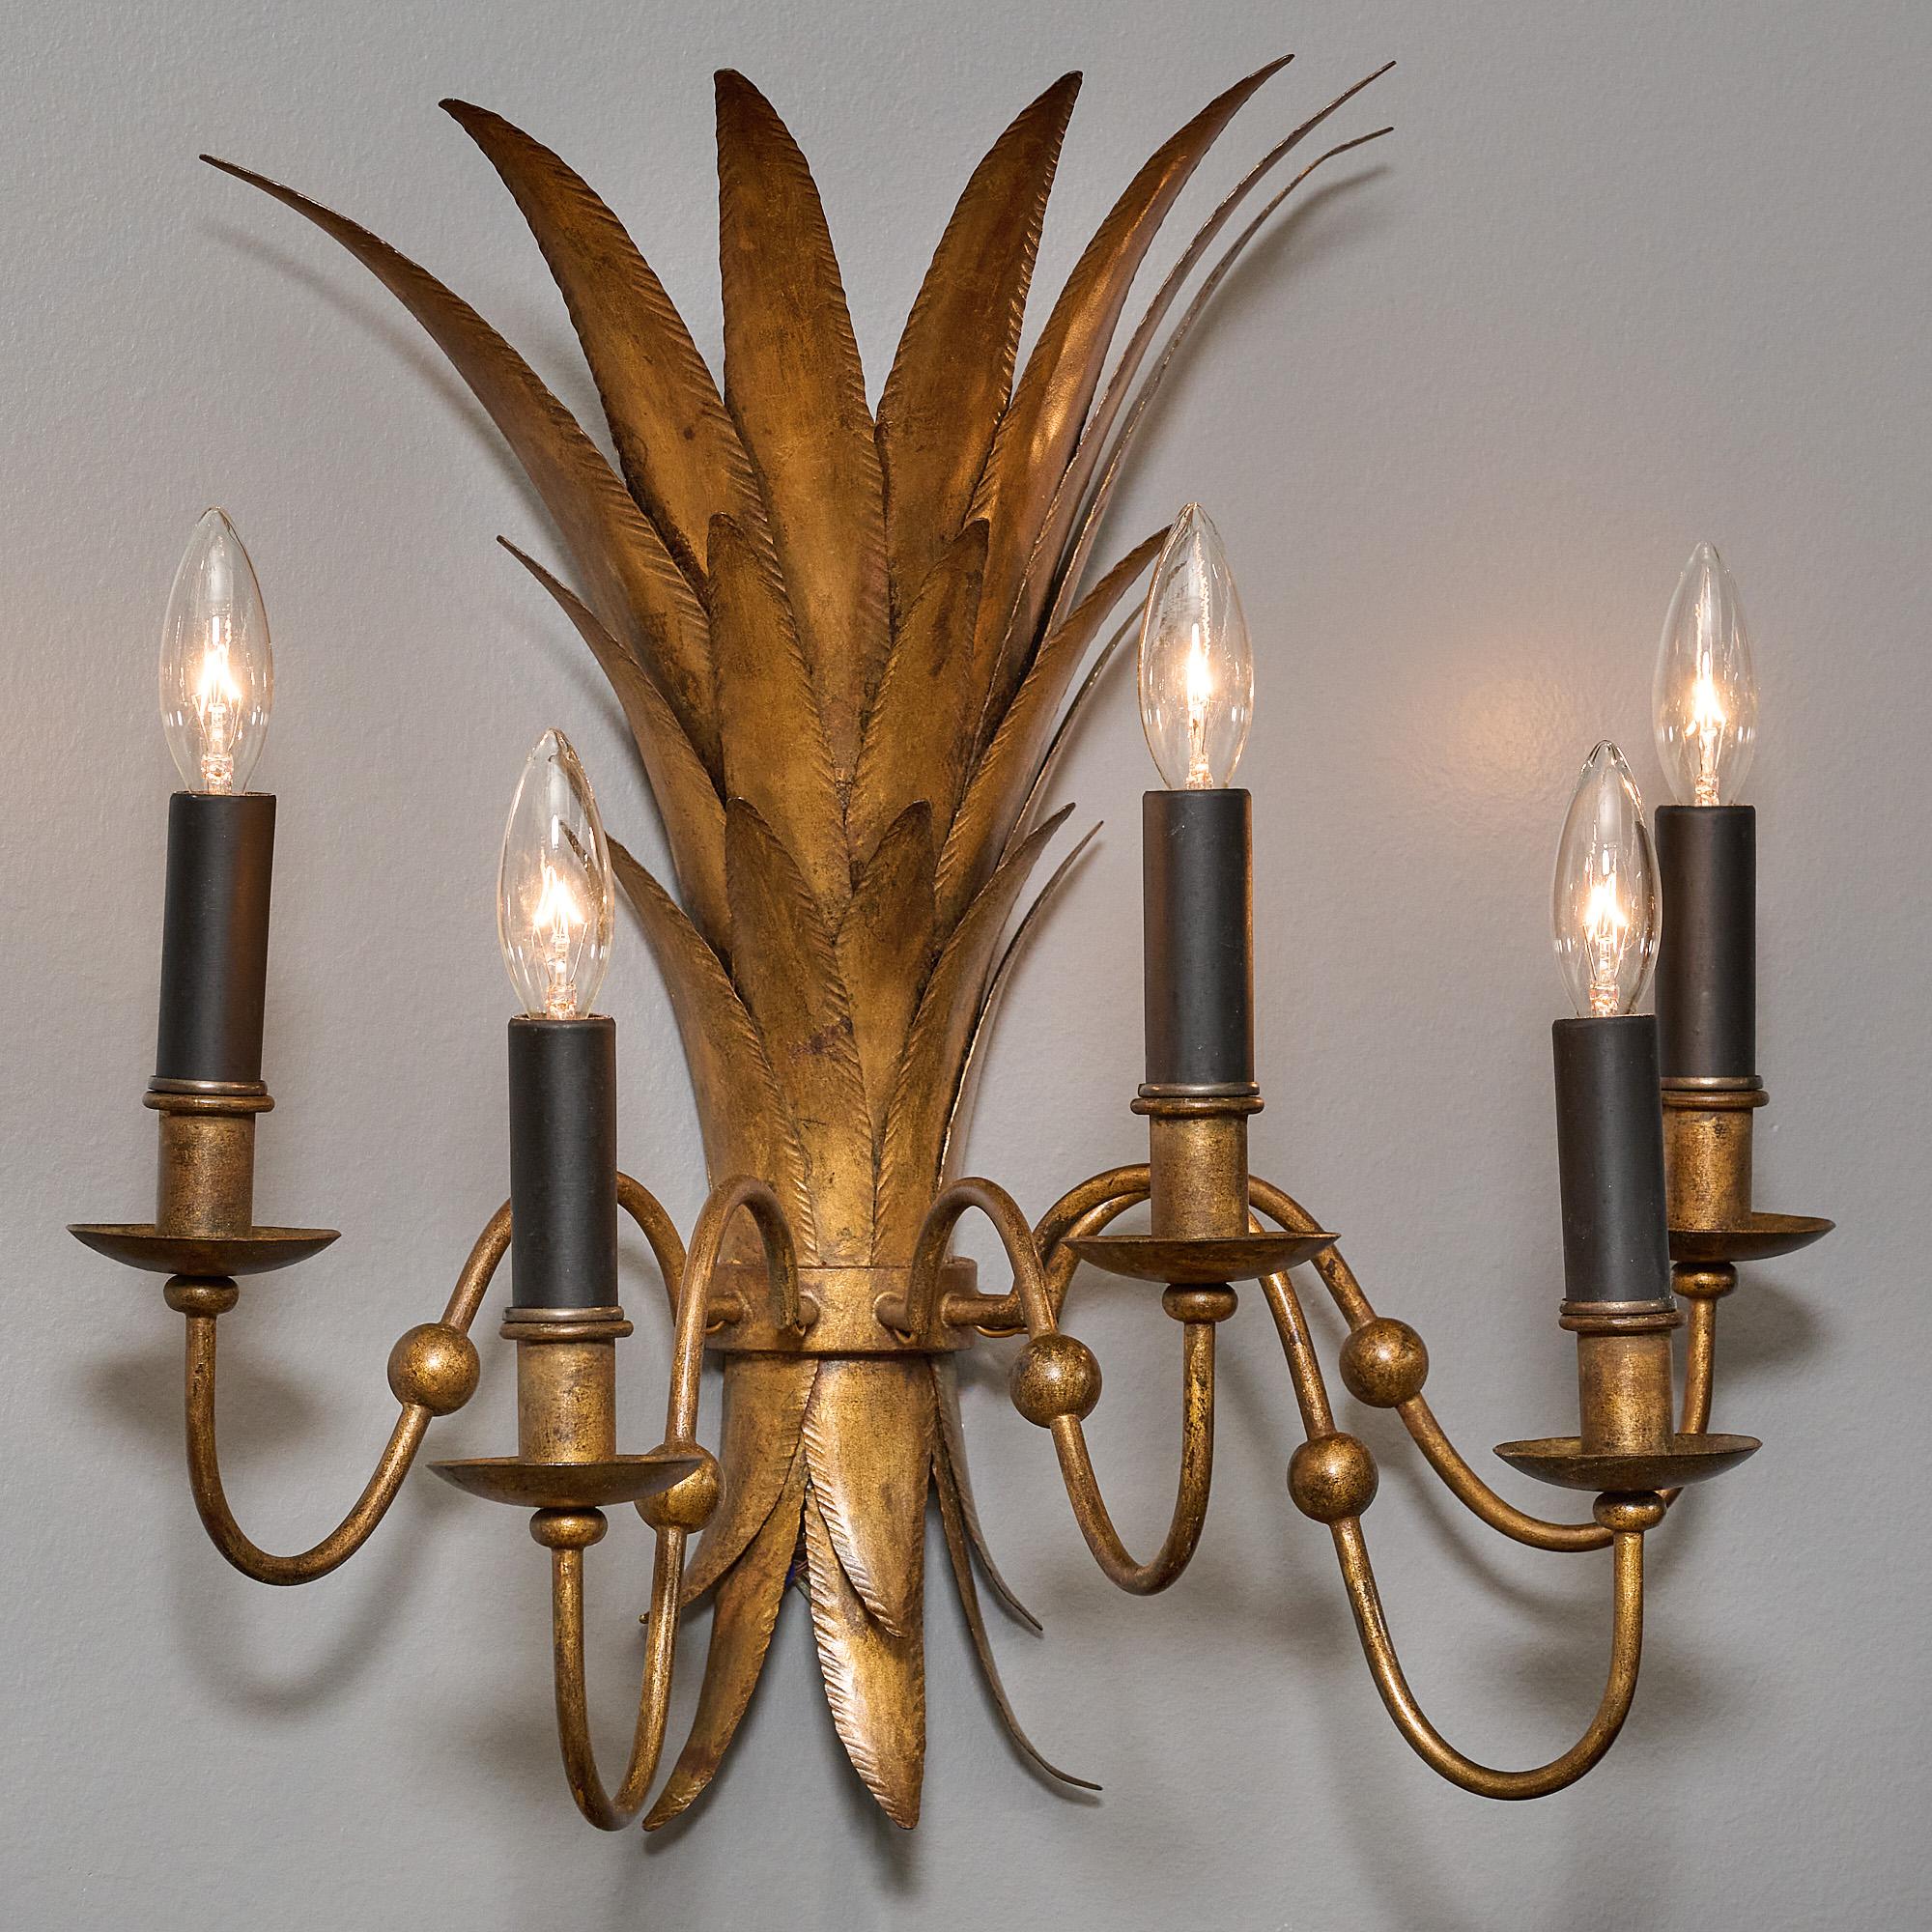 Pair of sconces, French, attributed to Maison Bagues, in the Art deco style, patinated gold leafed finish on “tole” metal, five arms. This piece has been newly rewired to fit US standards.